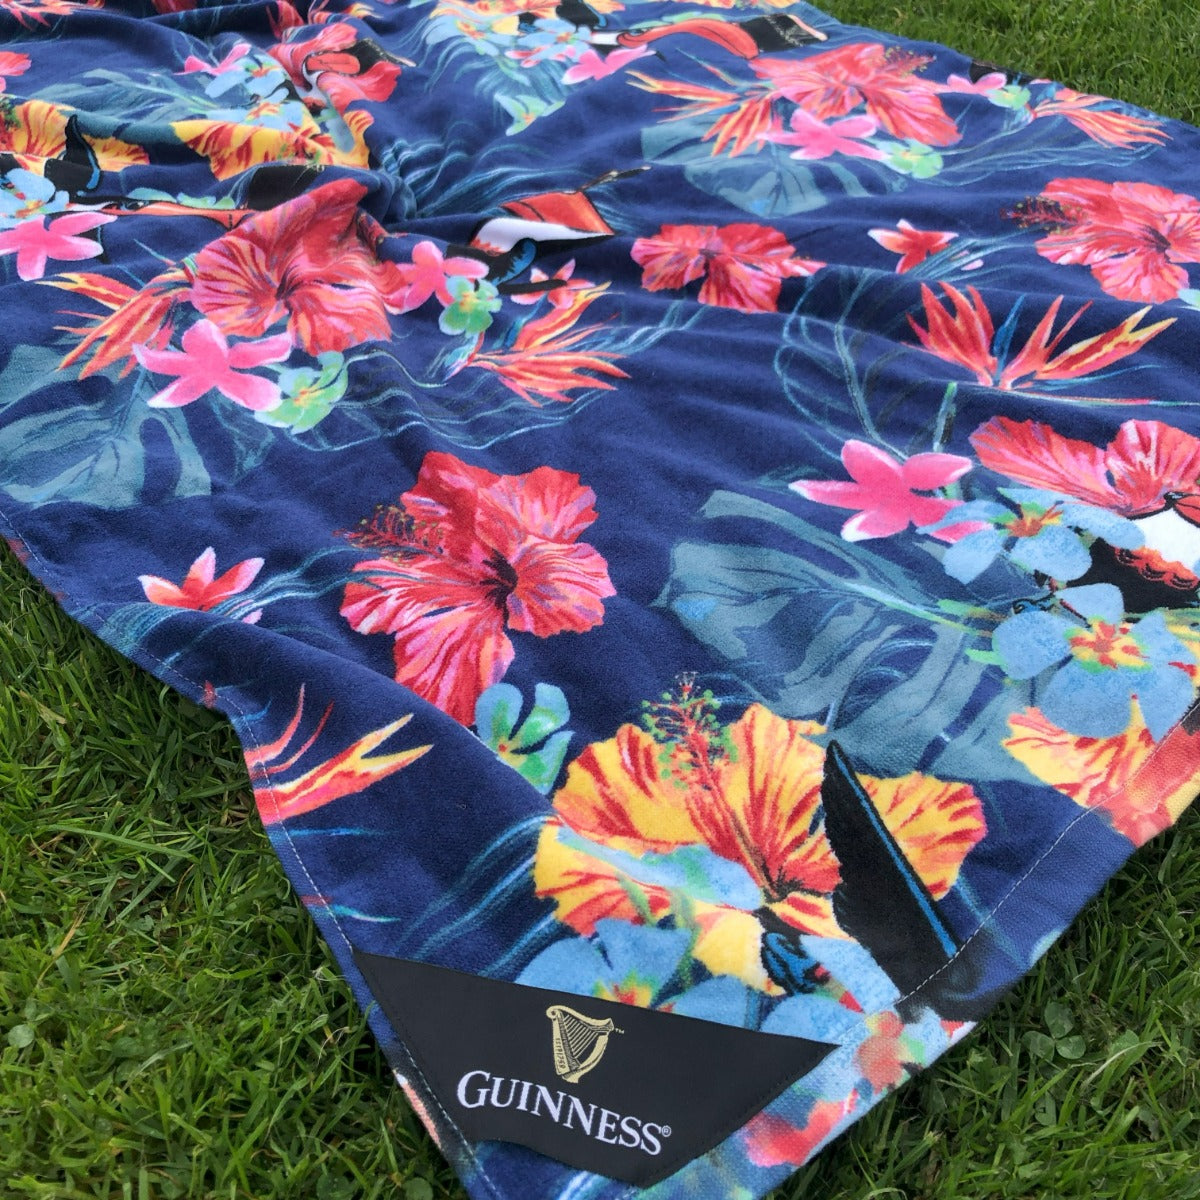 Guinness Toucan Hawaiian Beach Towel by Guinness UK, perfect for summer lounging.